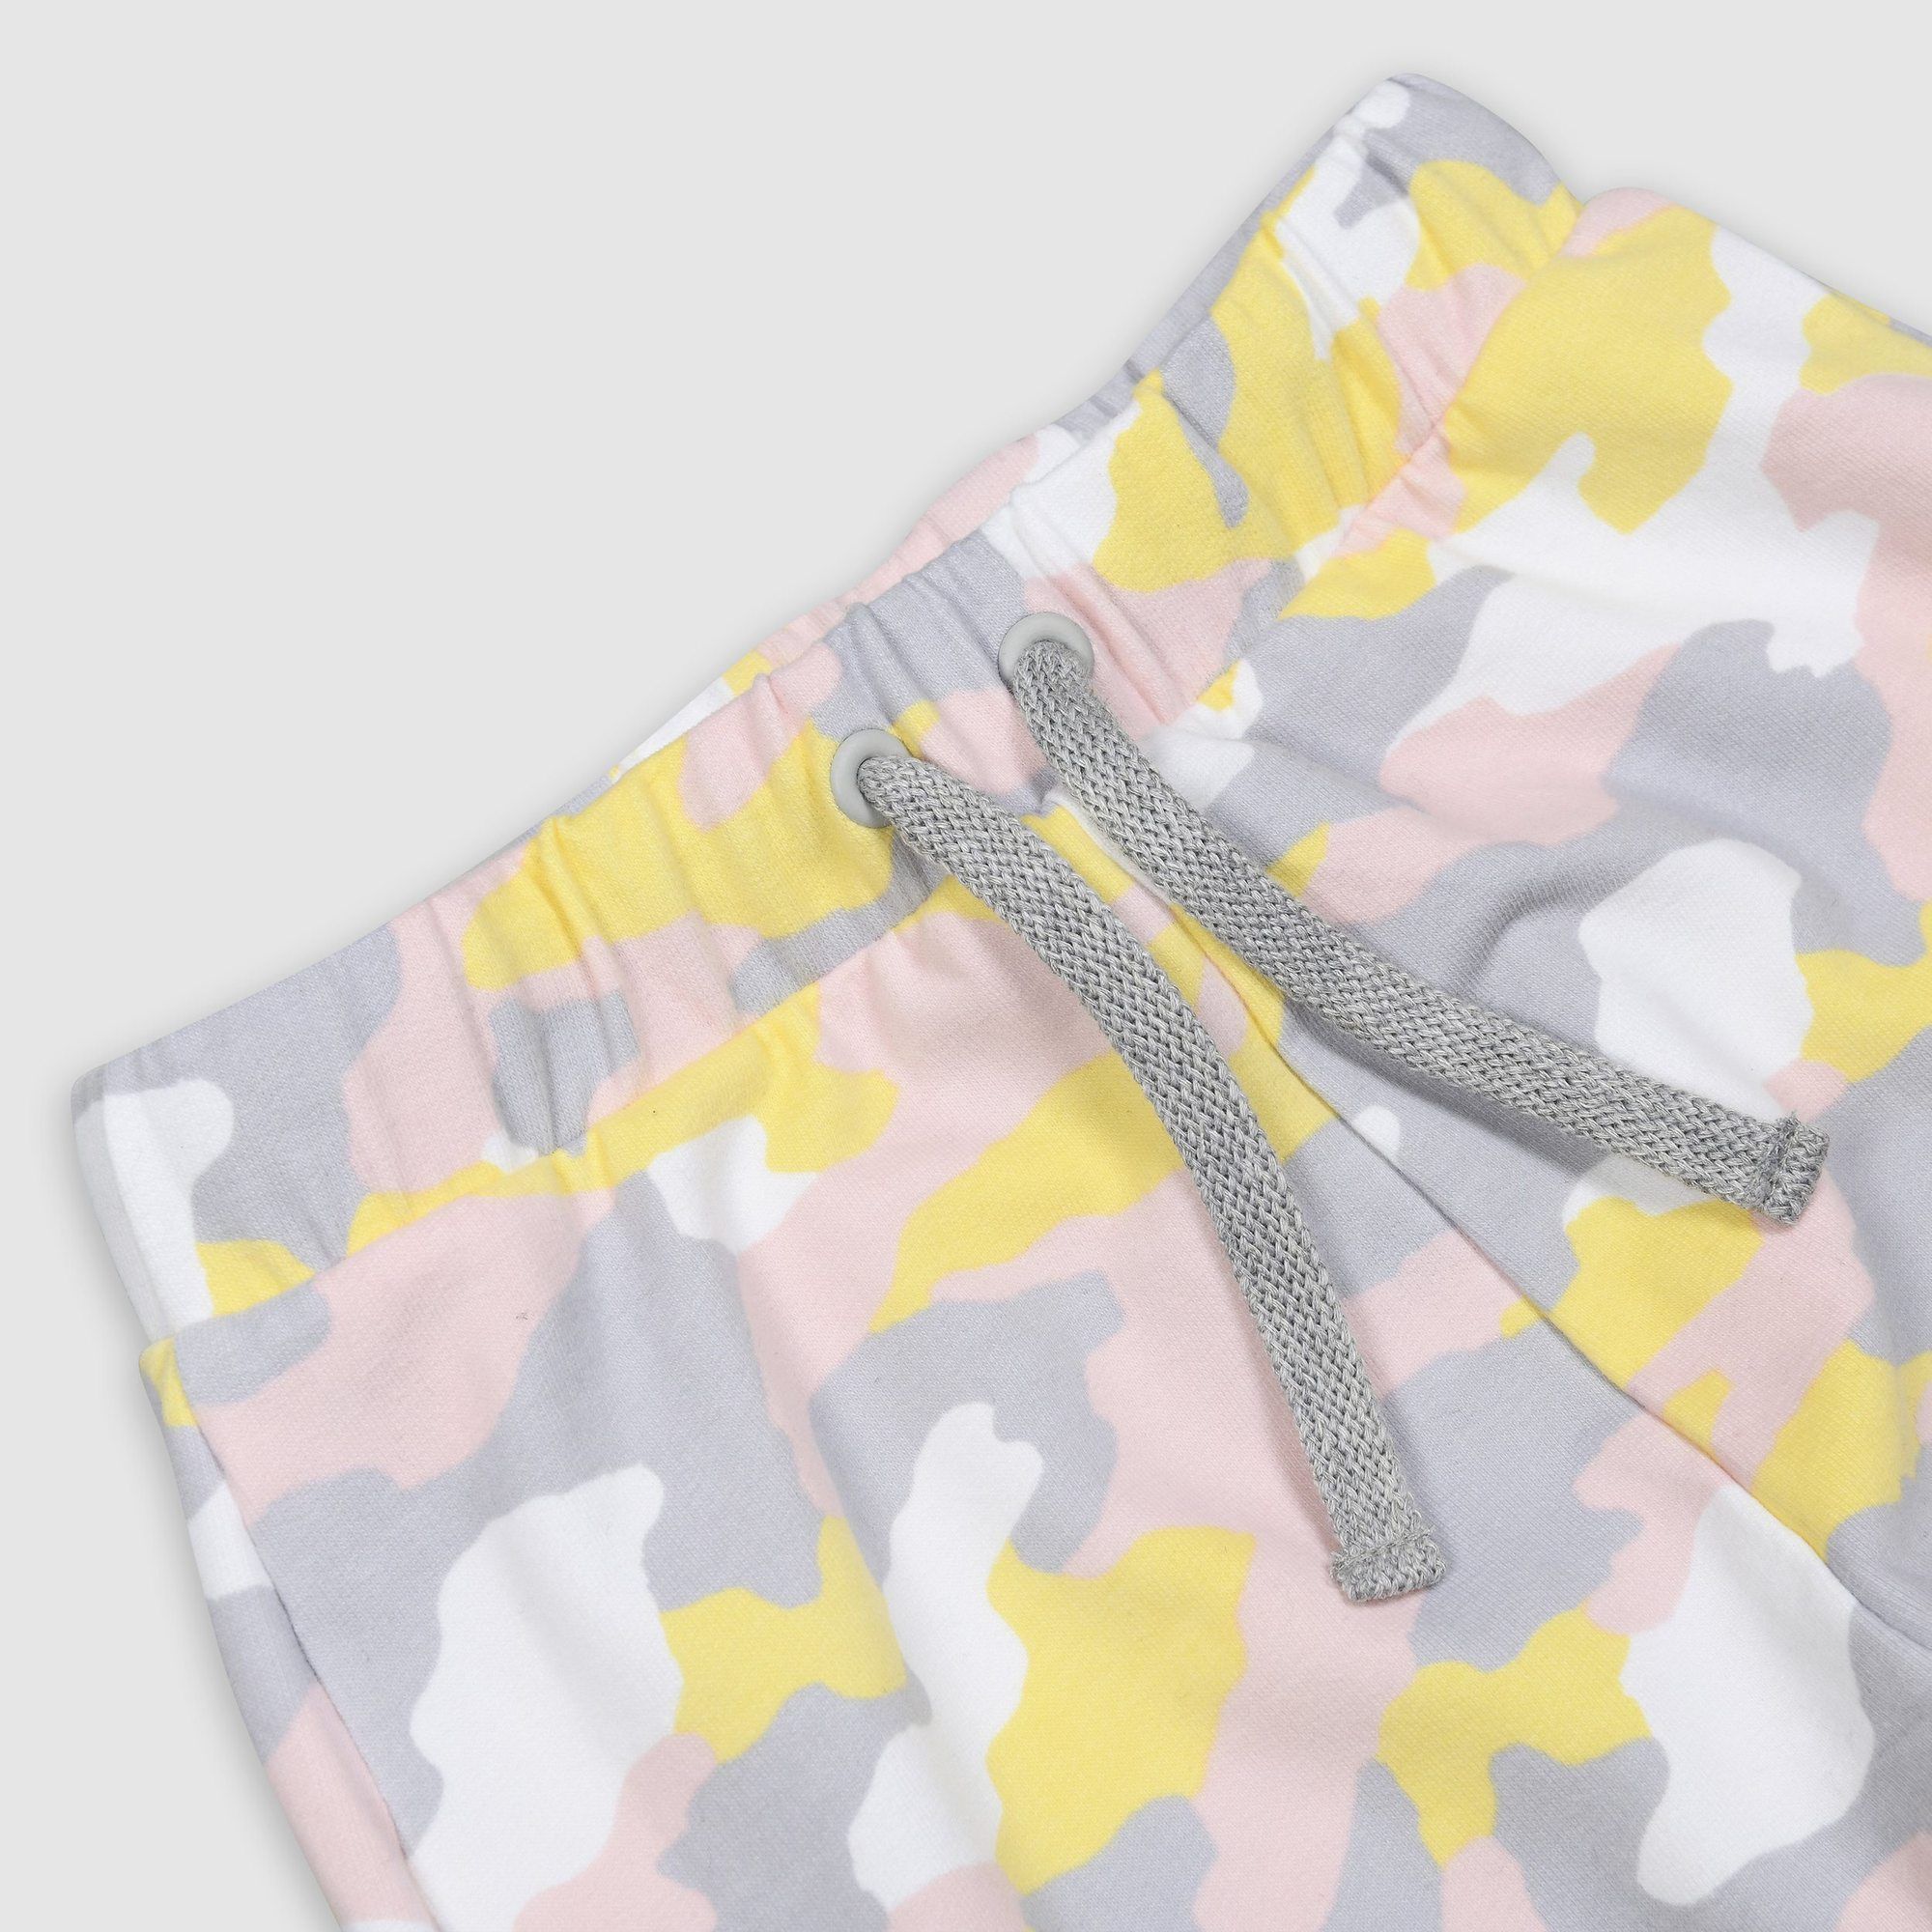 Relaxed fit joggers with drawstring waistband and ribbed bottoms in yellow with our bespoke camo print. Made from the most soft cotton fleece. 